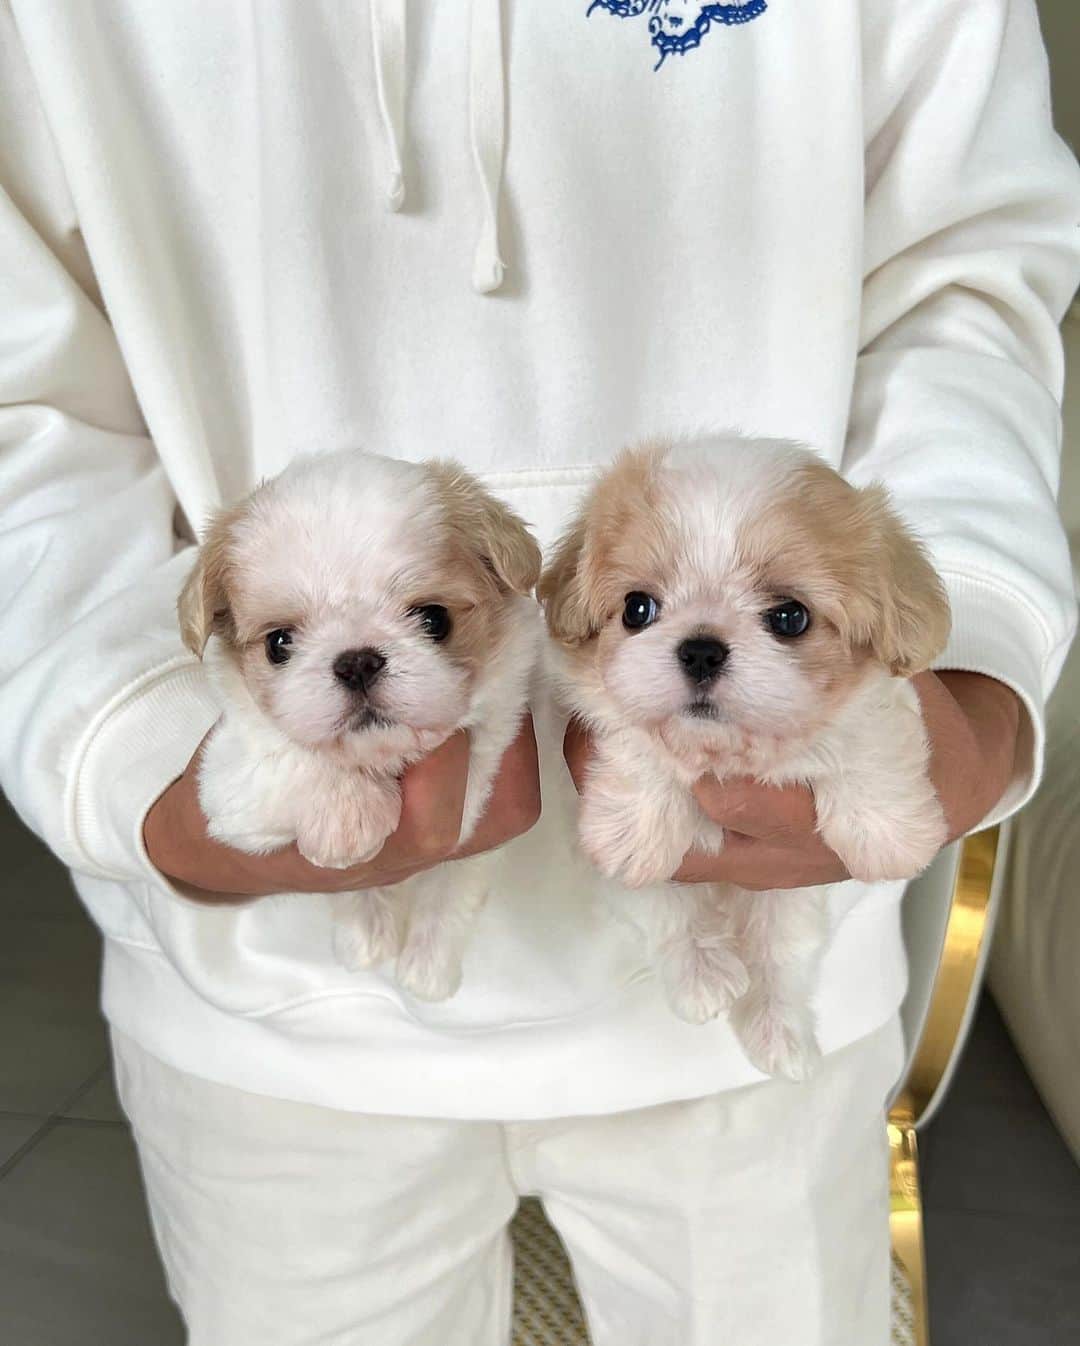 Rolly Pups INCのインスタグラム：「Precious Cavatese siblings😍 mommy: King Charles, daddy: Maltese! Who knew this hybrid would become this adorable😆 only at KPups by Rolly! . . We Deliver to Selected Countries, where we can DELIVER SAFELY !! ✈  For Puppy Inquiries, Please Call or Text or WhatsApp TONY +1 (267) 301-6649 JAY +82 10 5427 3971 . For More Details, Please refer to the website on our Instagram profile link.  www.kpups1.com」